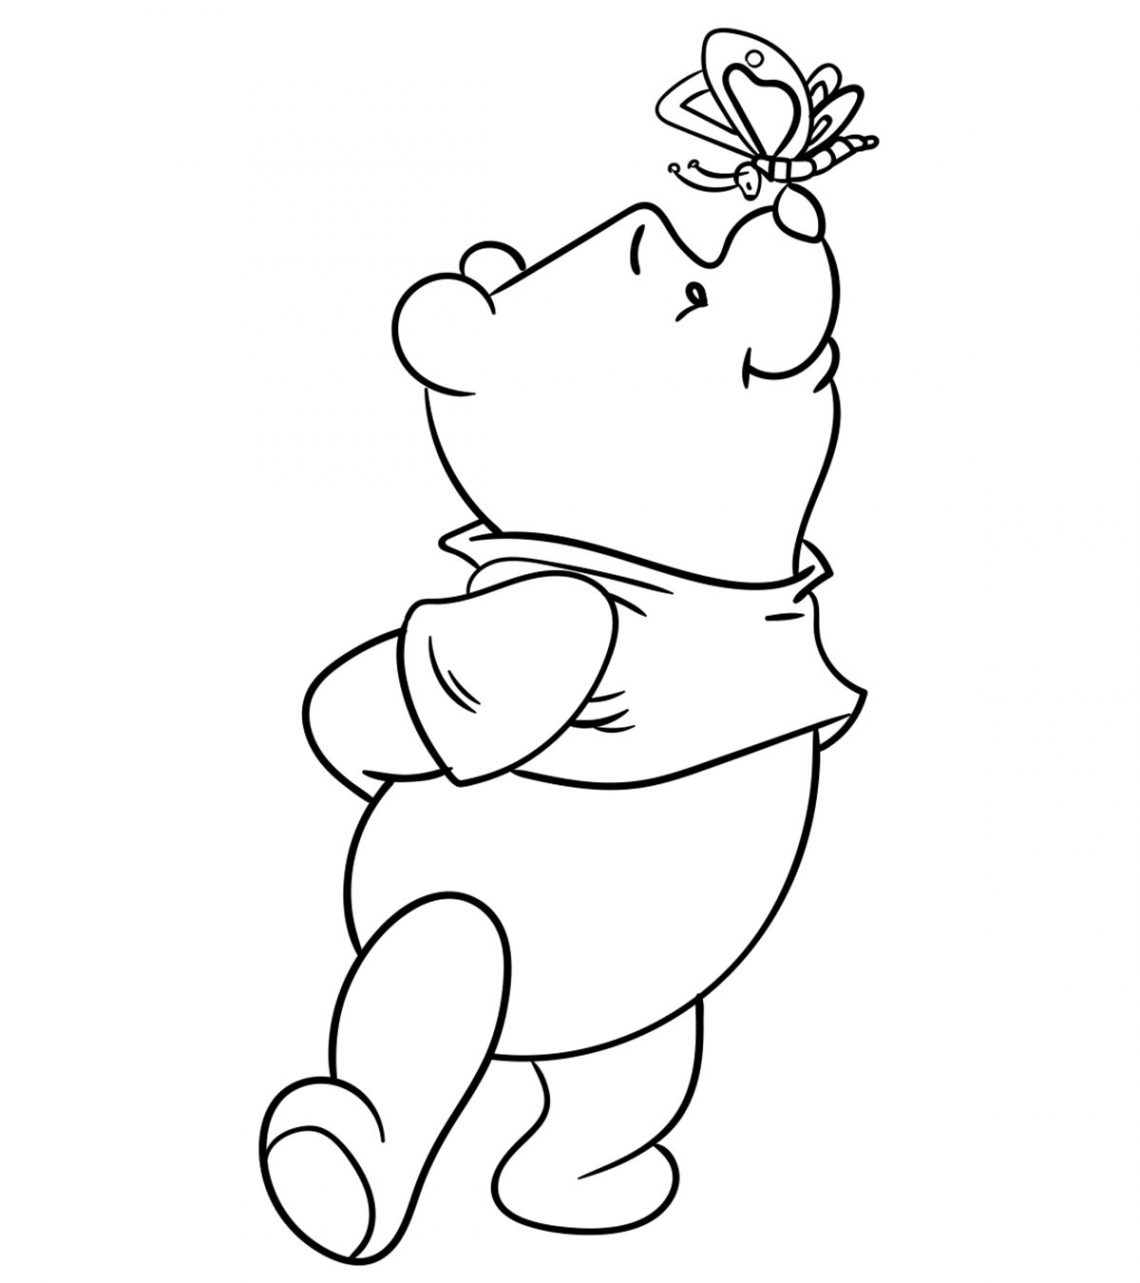 Winnie the Pooh Coloring Pages For Kids - Visual Arts Ideas